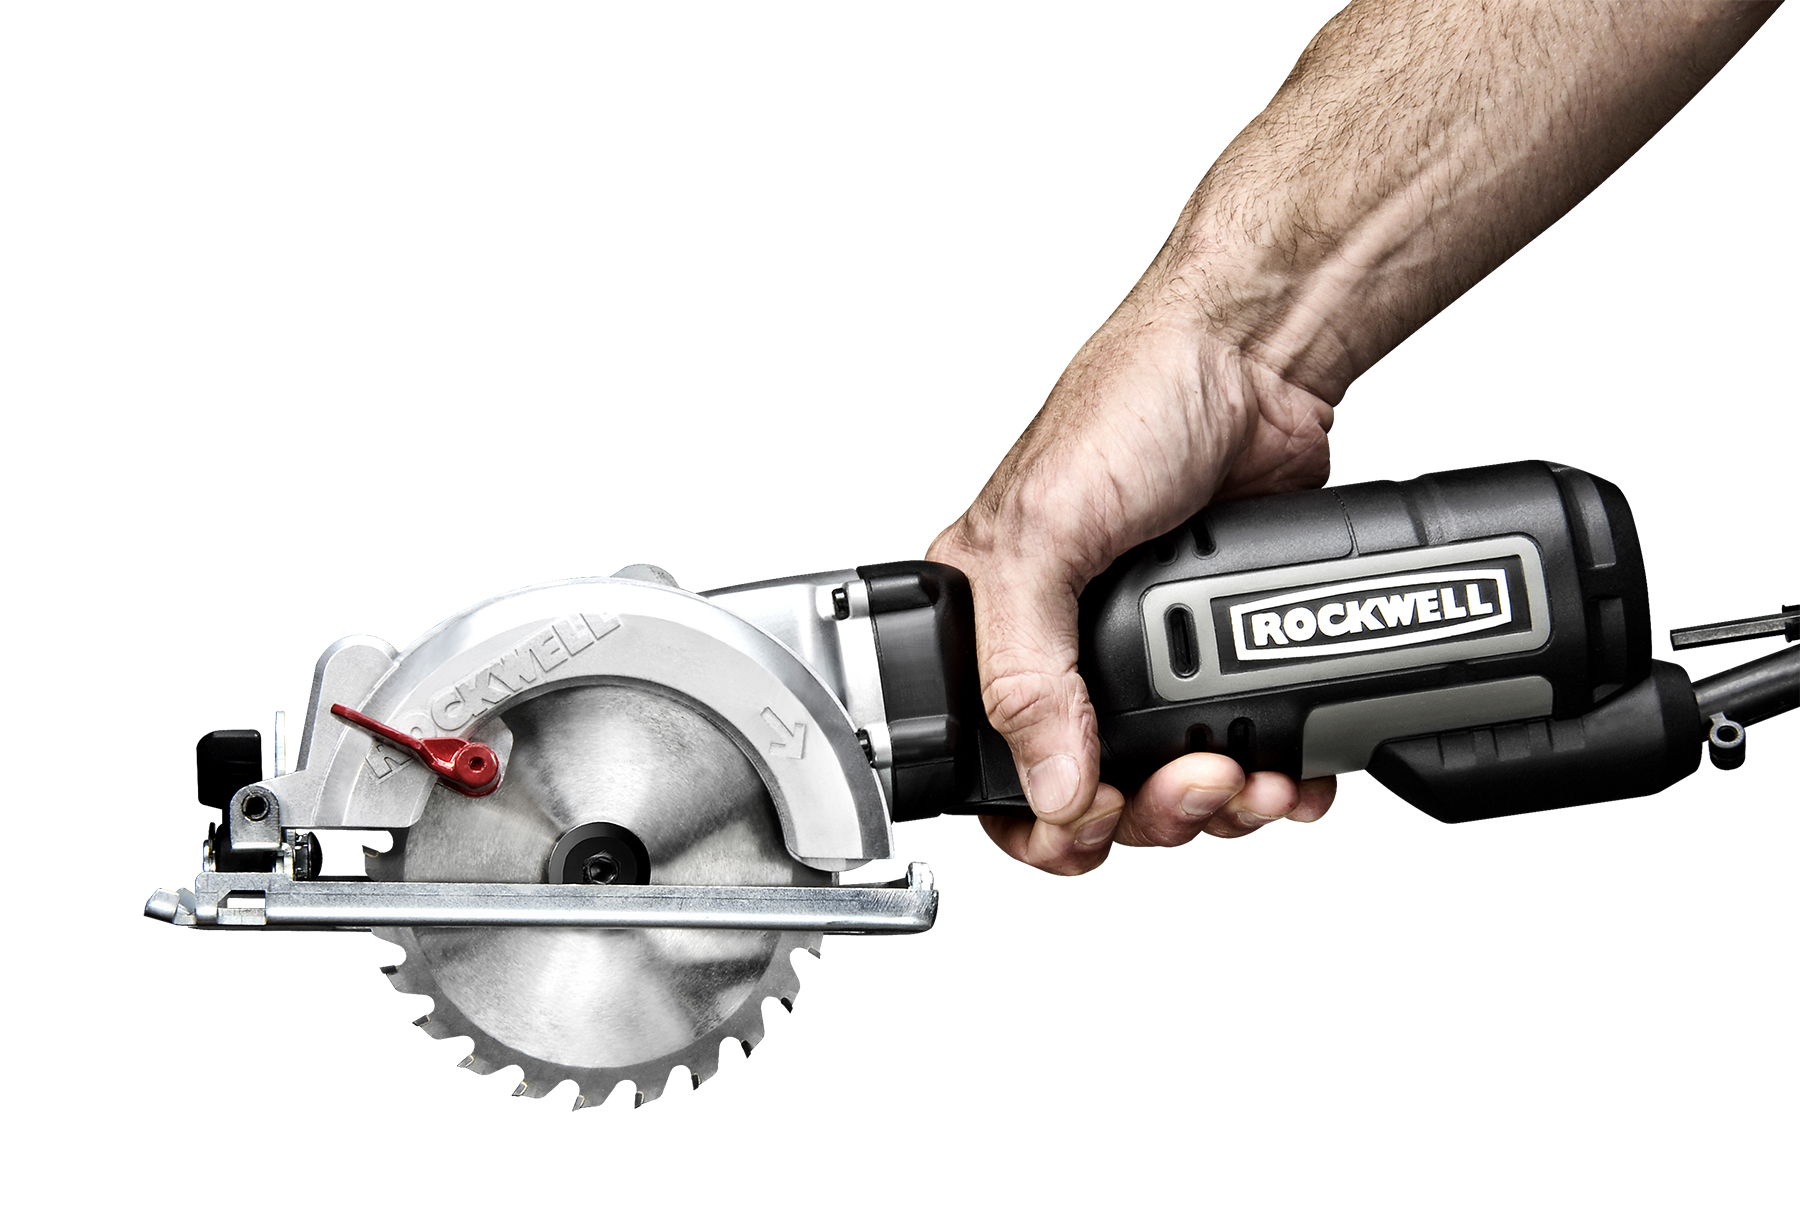 Rockwell Compact Circular Saw has a 4-1/2 in. blade and is 50% lighter than conventional 7-1/4 in. circular saws.